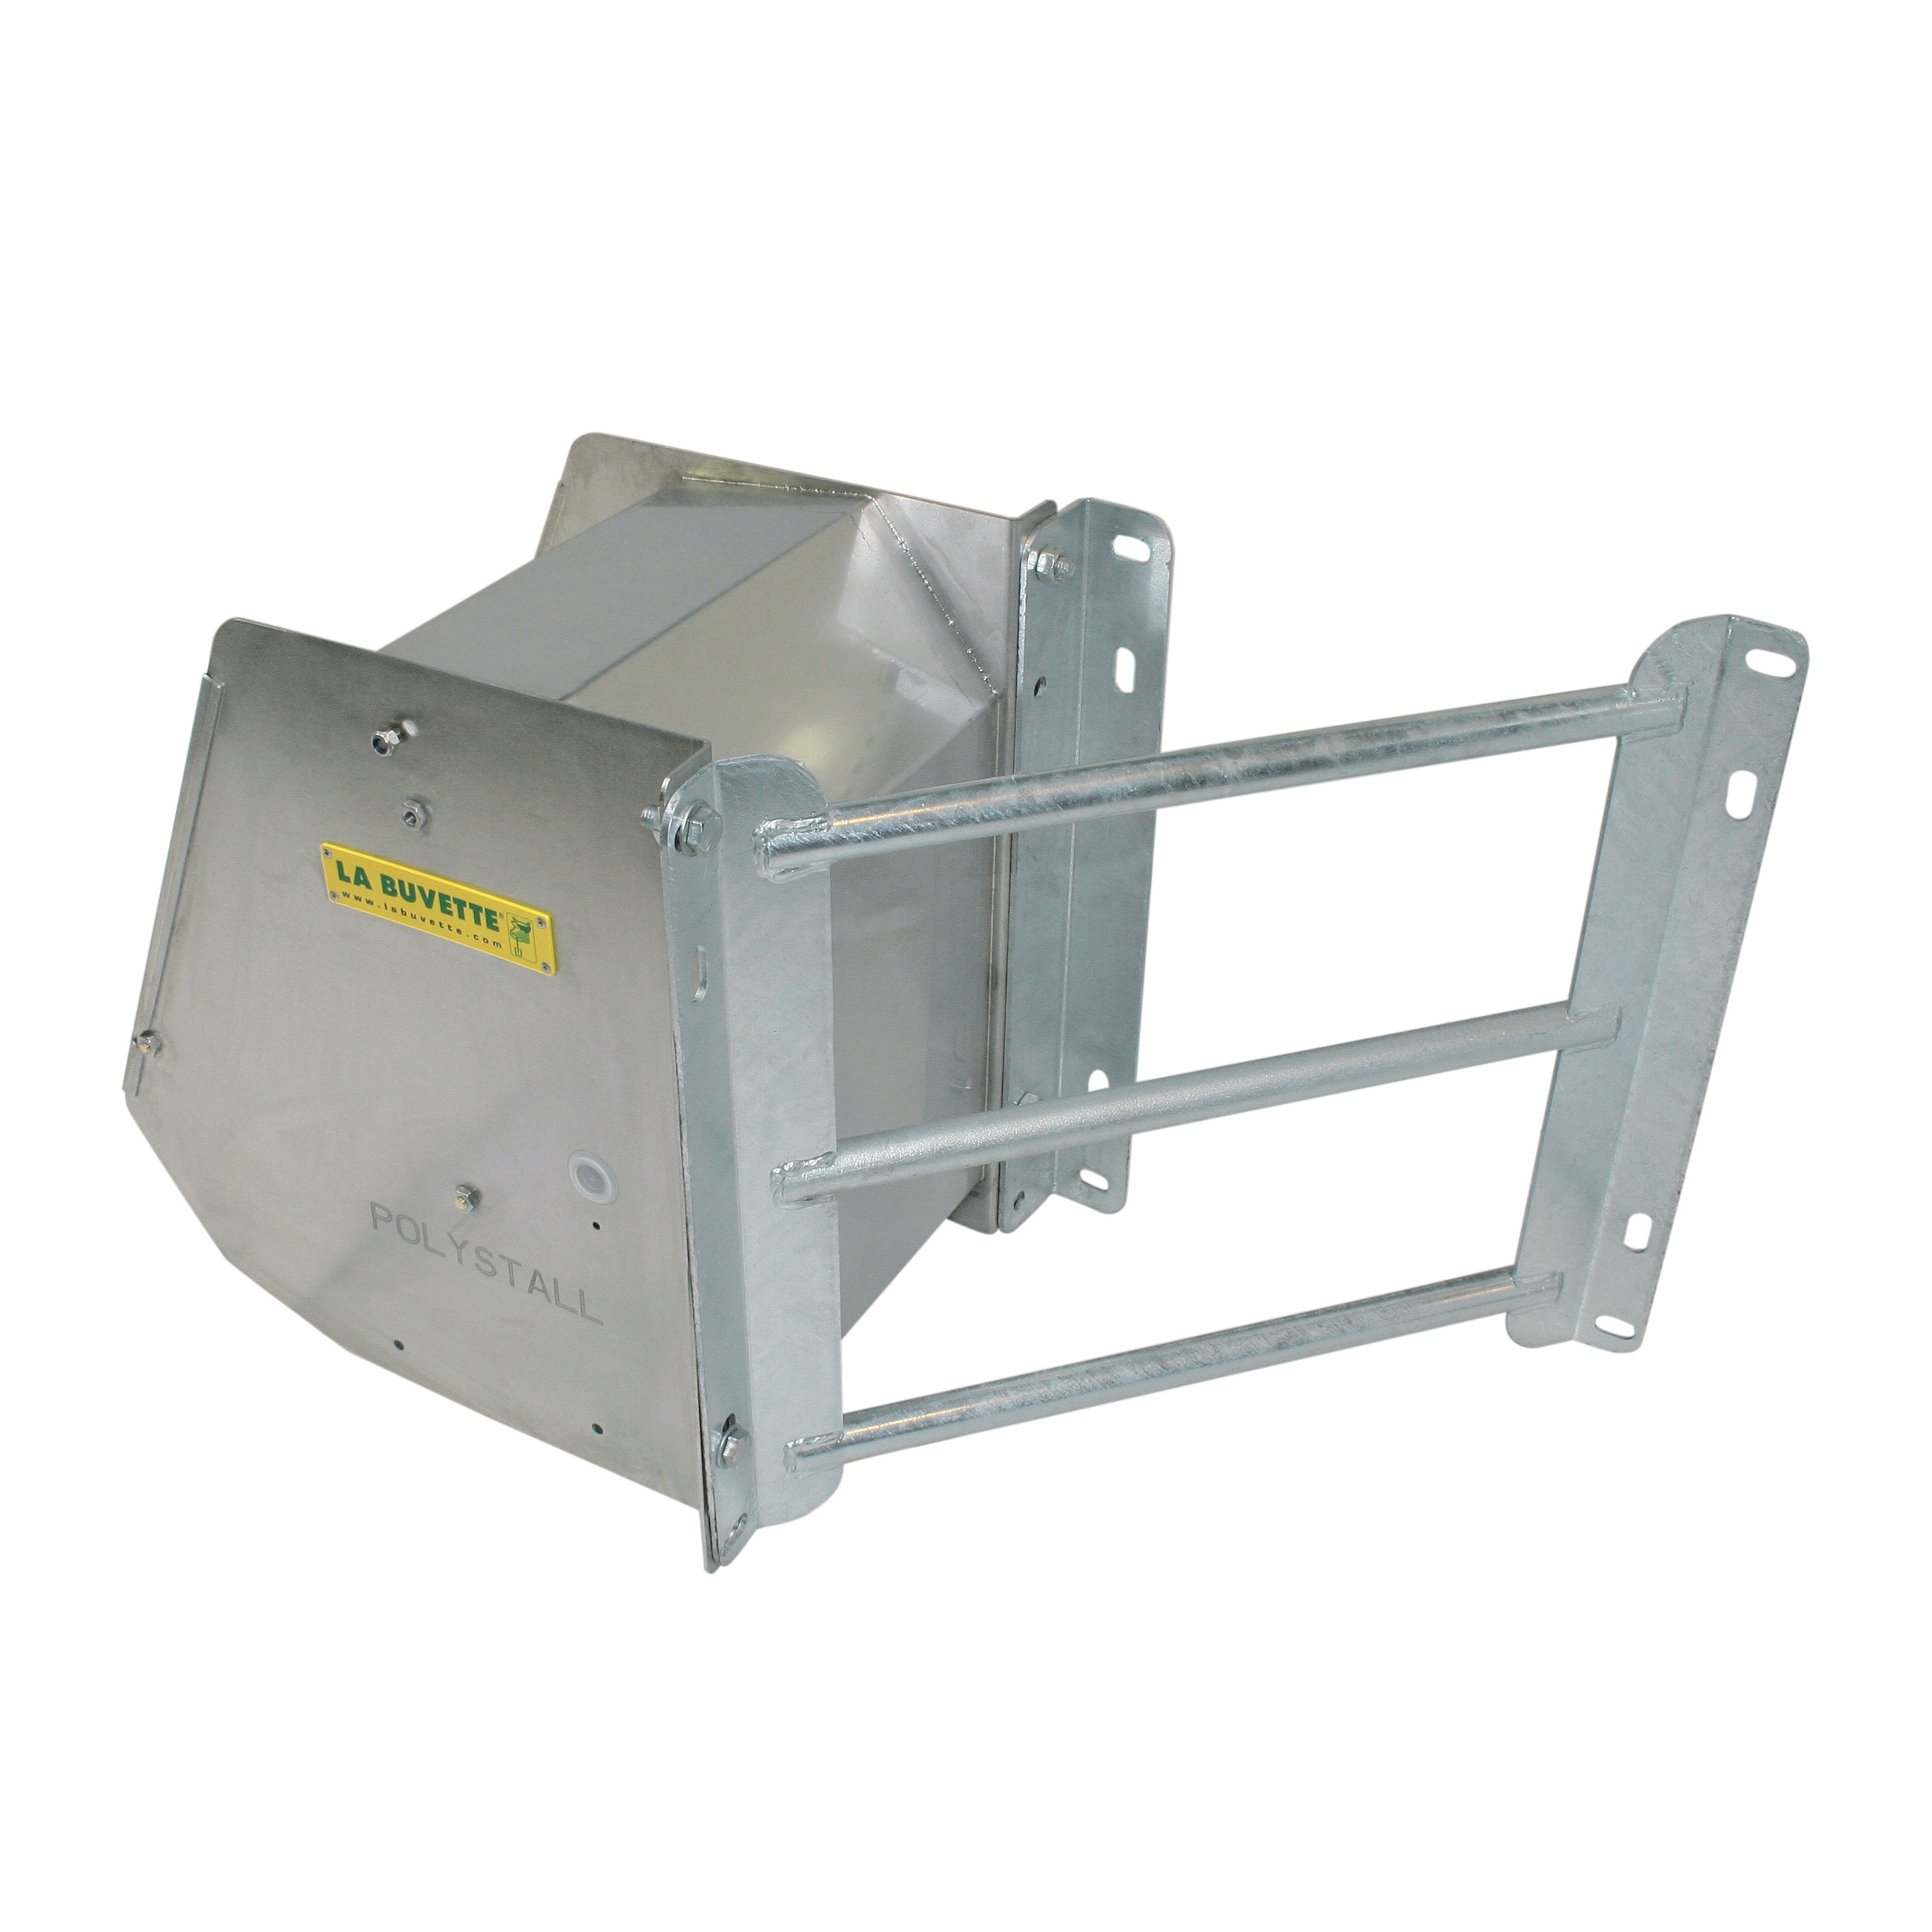 A372 mounting support POLYSTALL